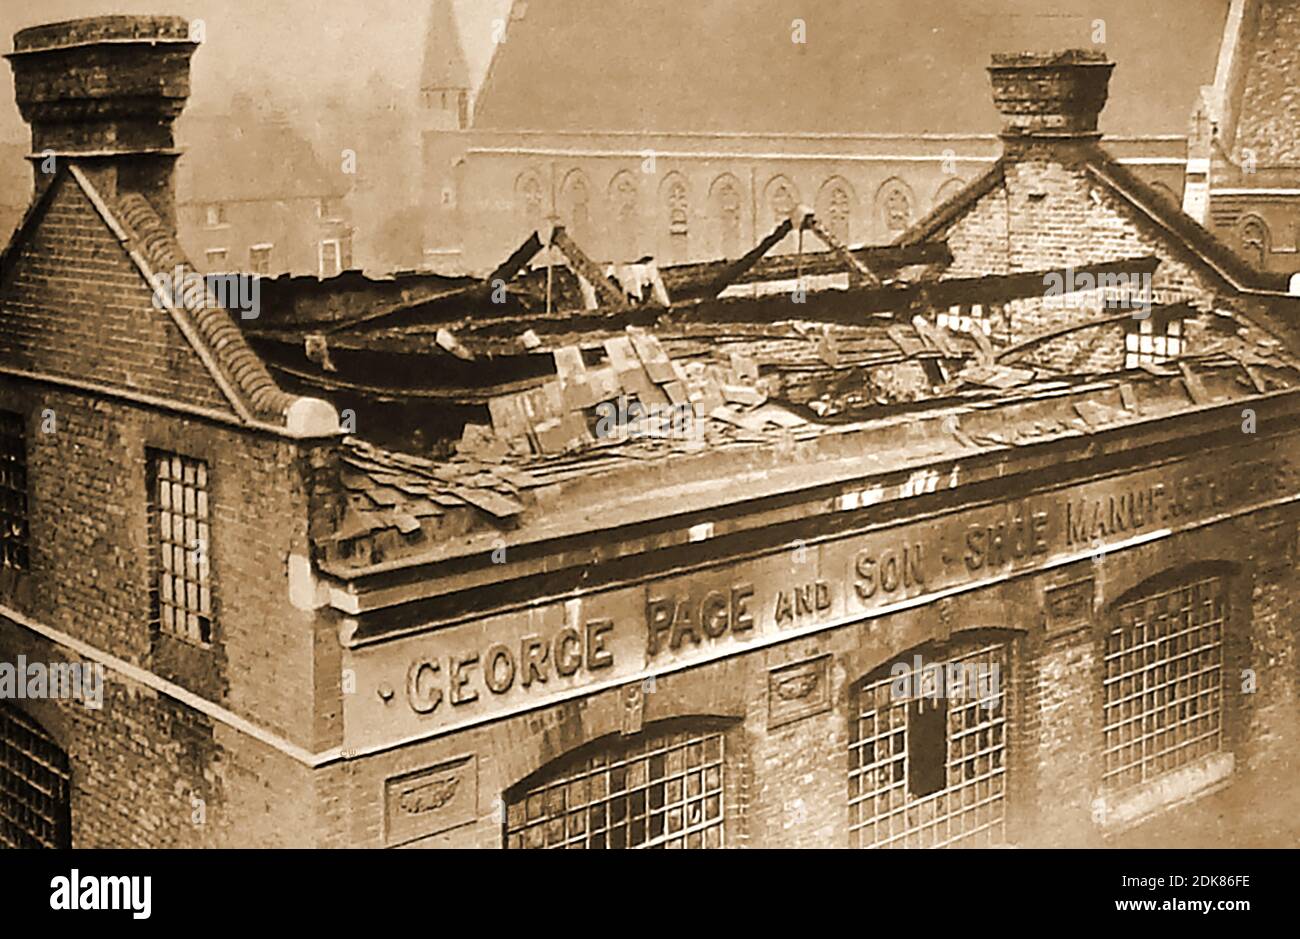 Bomb damage in Britain after the first attack by German Planes on Britain in the First World War.  The main campaign against Britain started in January 1915 using airships . The German Navy and Army Luftstreitkräfte mounted over 50  'zeppelin' bombing raids on the United Kingdom though both Zeppelin and Schütte-Lanz airships were used. The picture shows the  wrecked George Page and son, shoe manufacturers building. Stock Photo